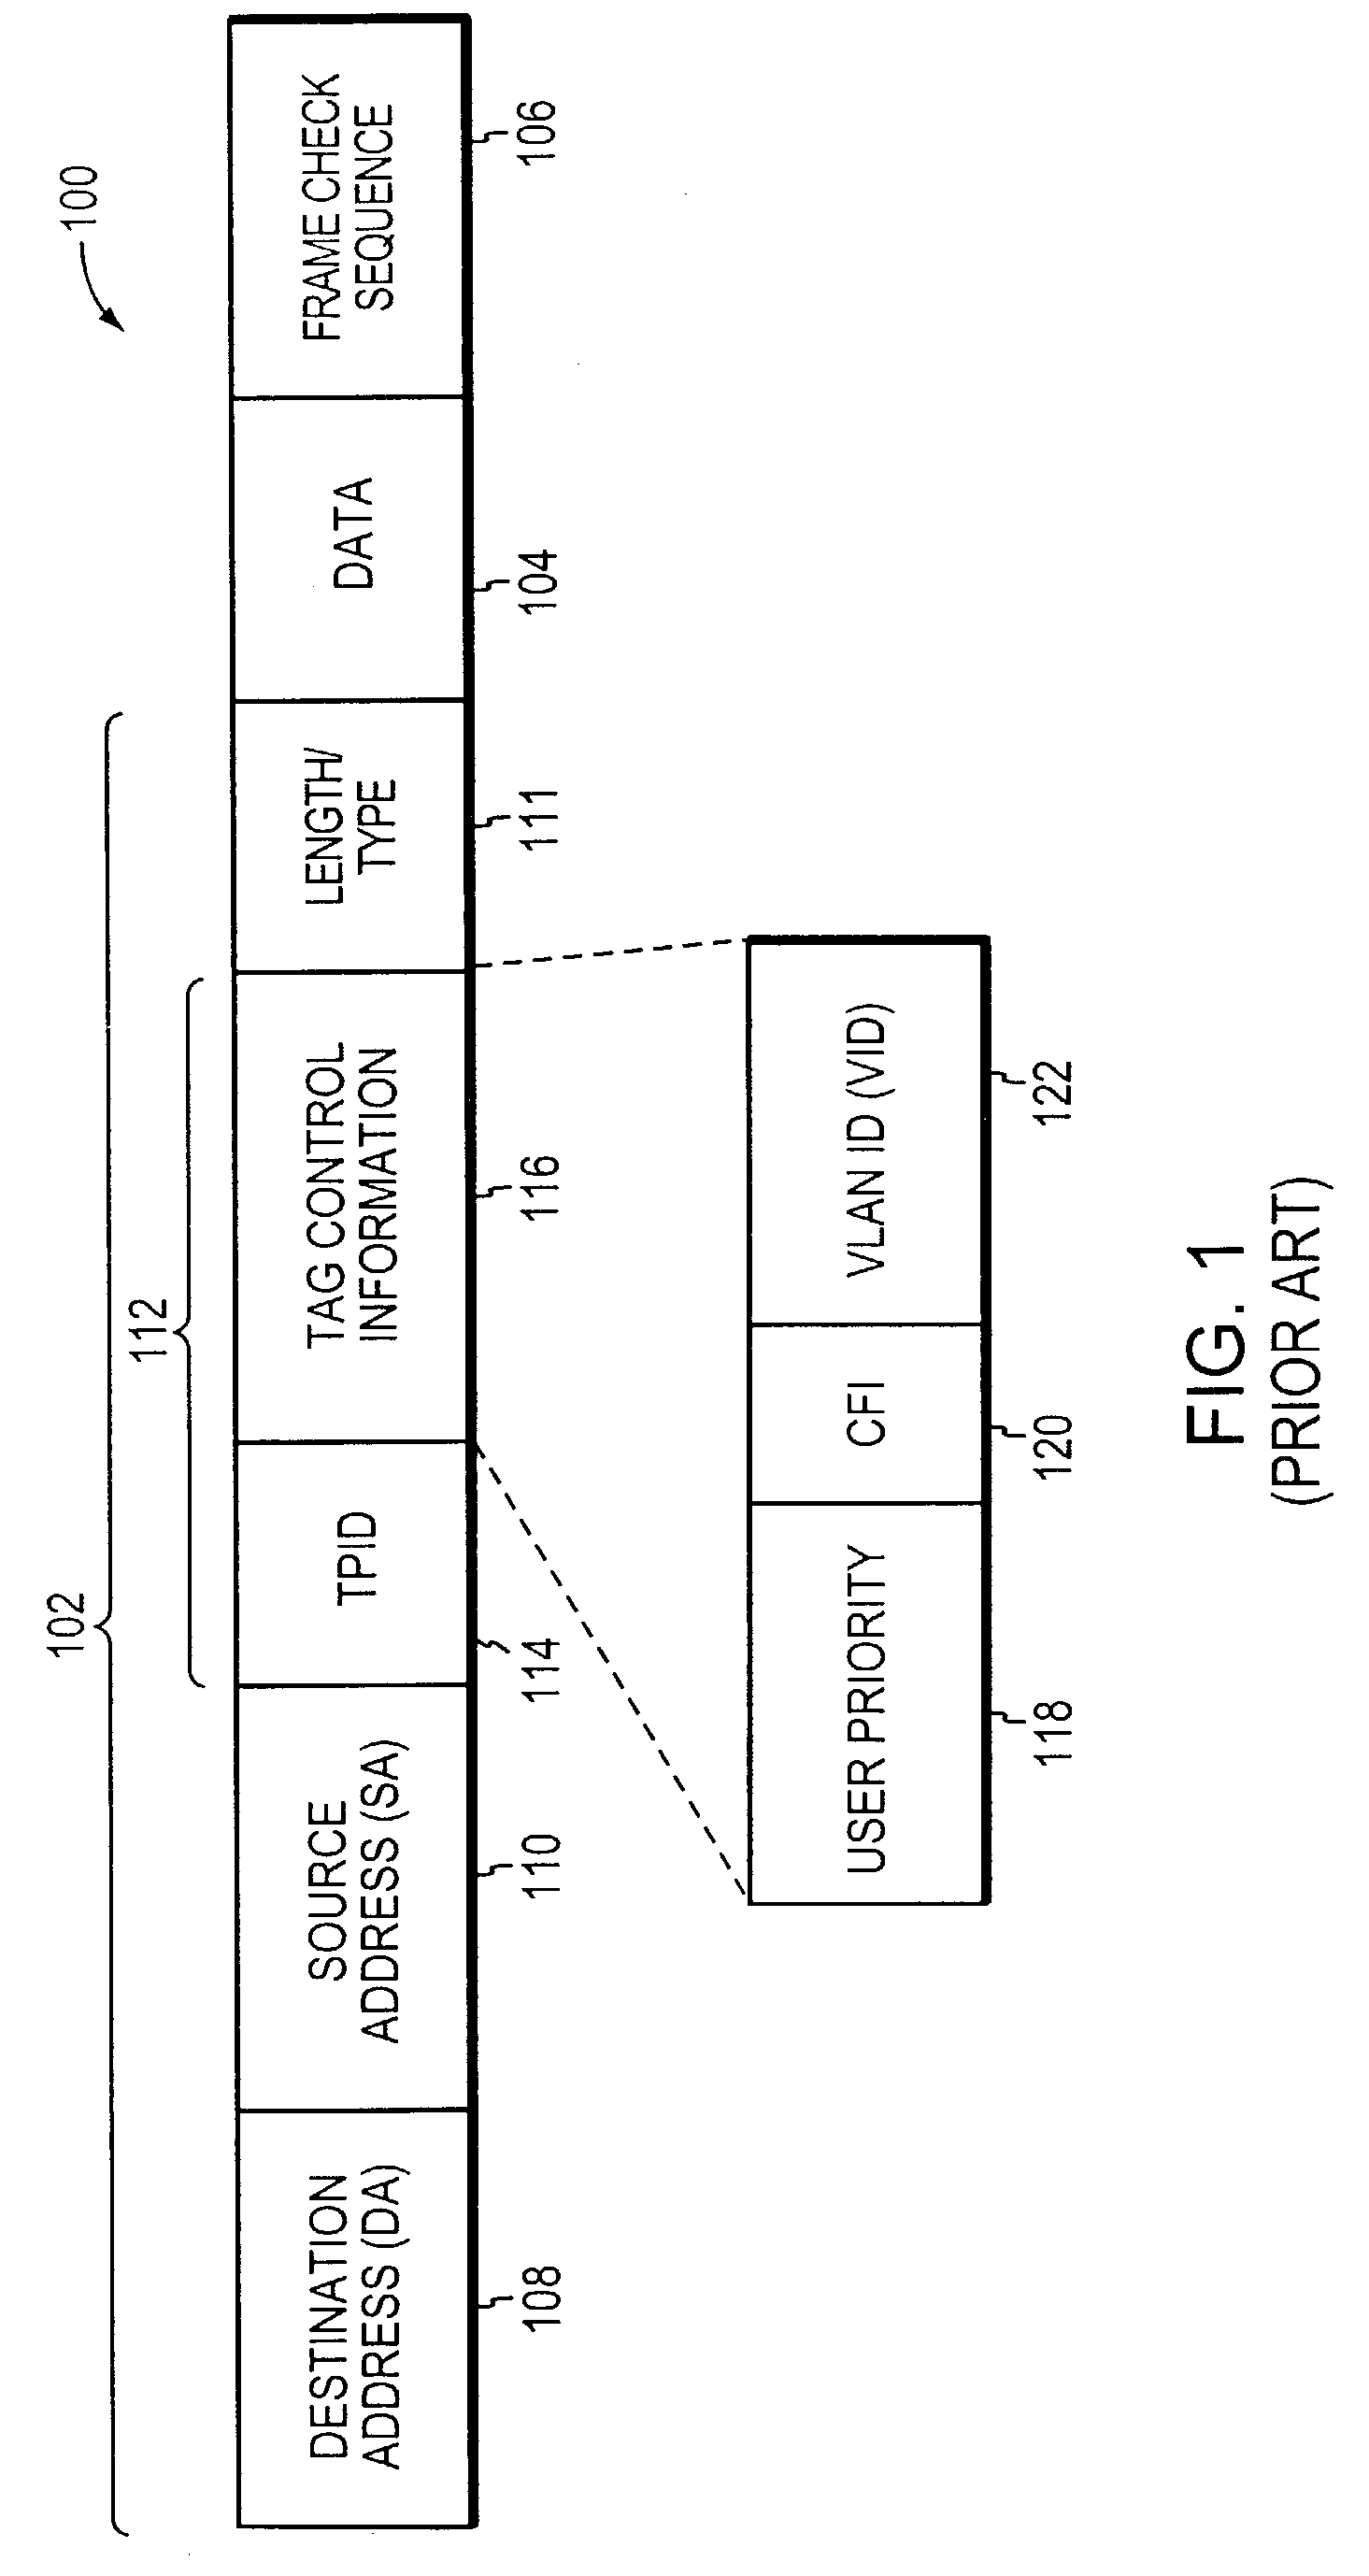 Multi-tiered Virtual Local area Network (VLAN) domain mapping mechanism